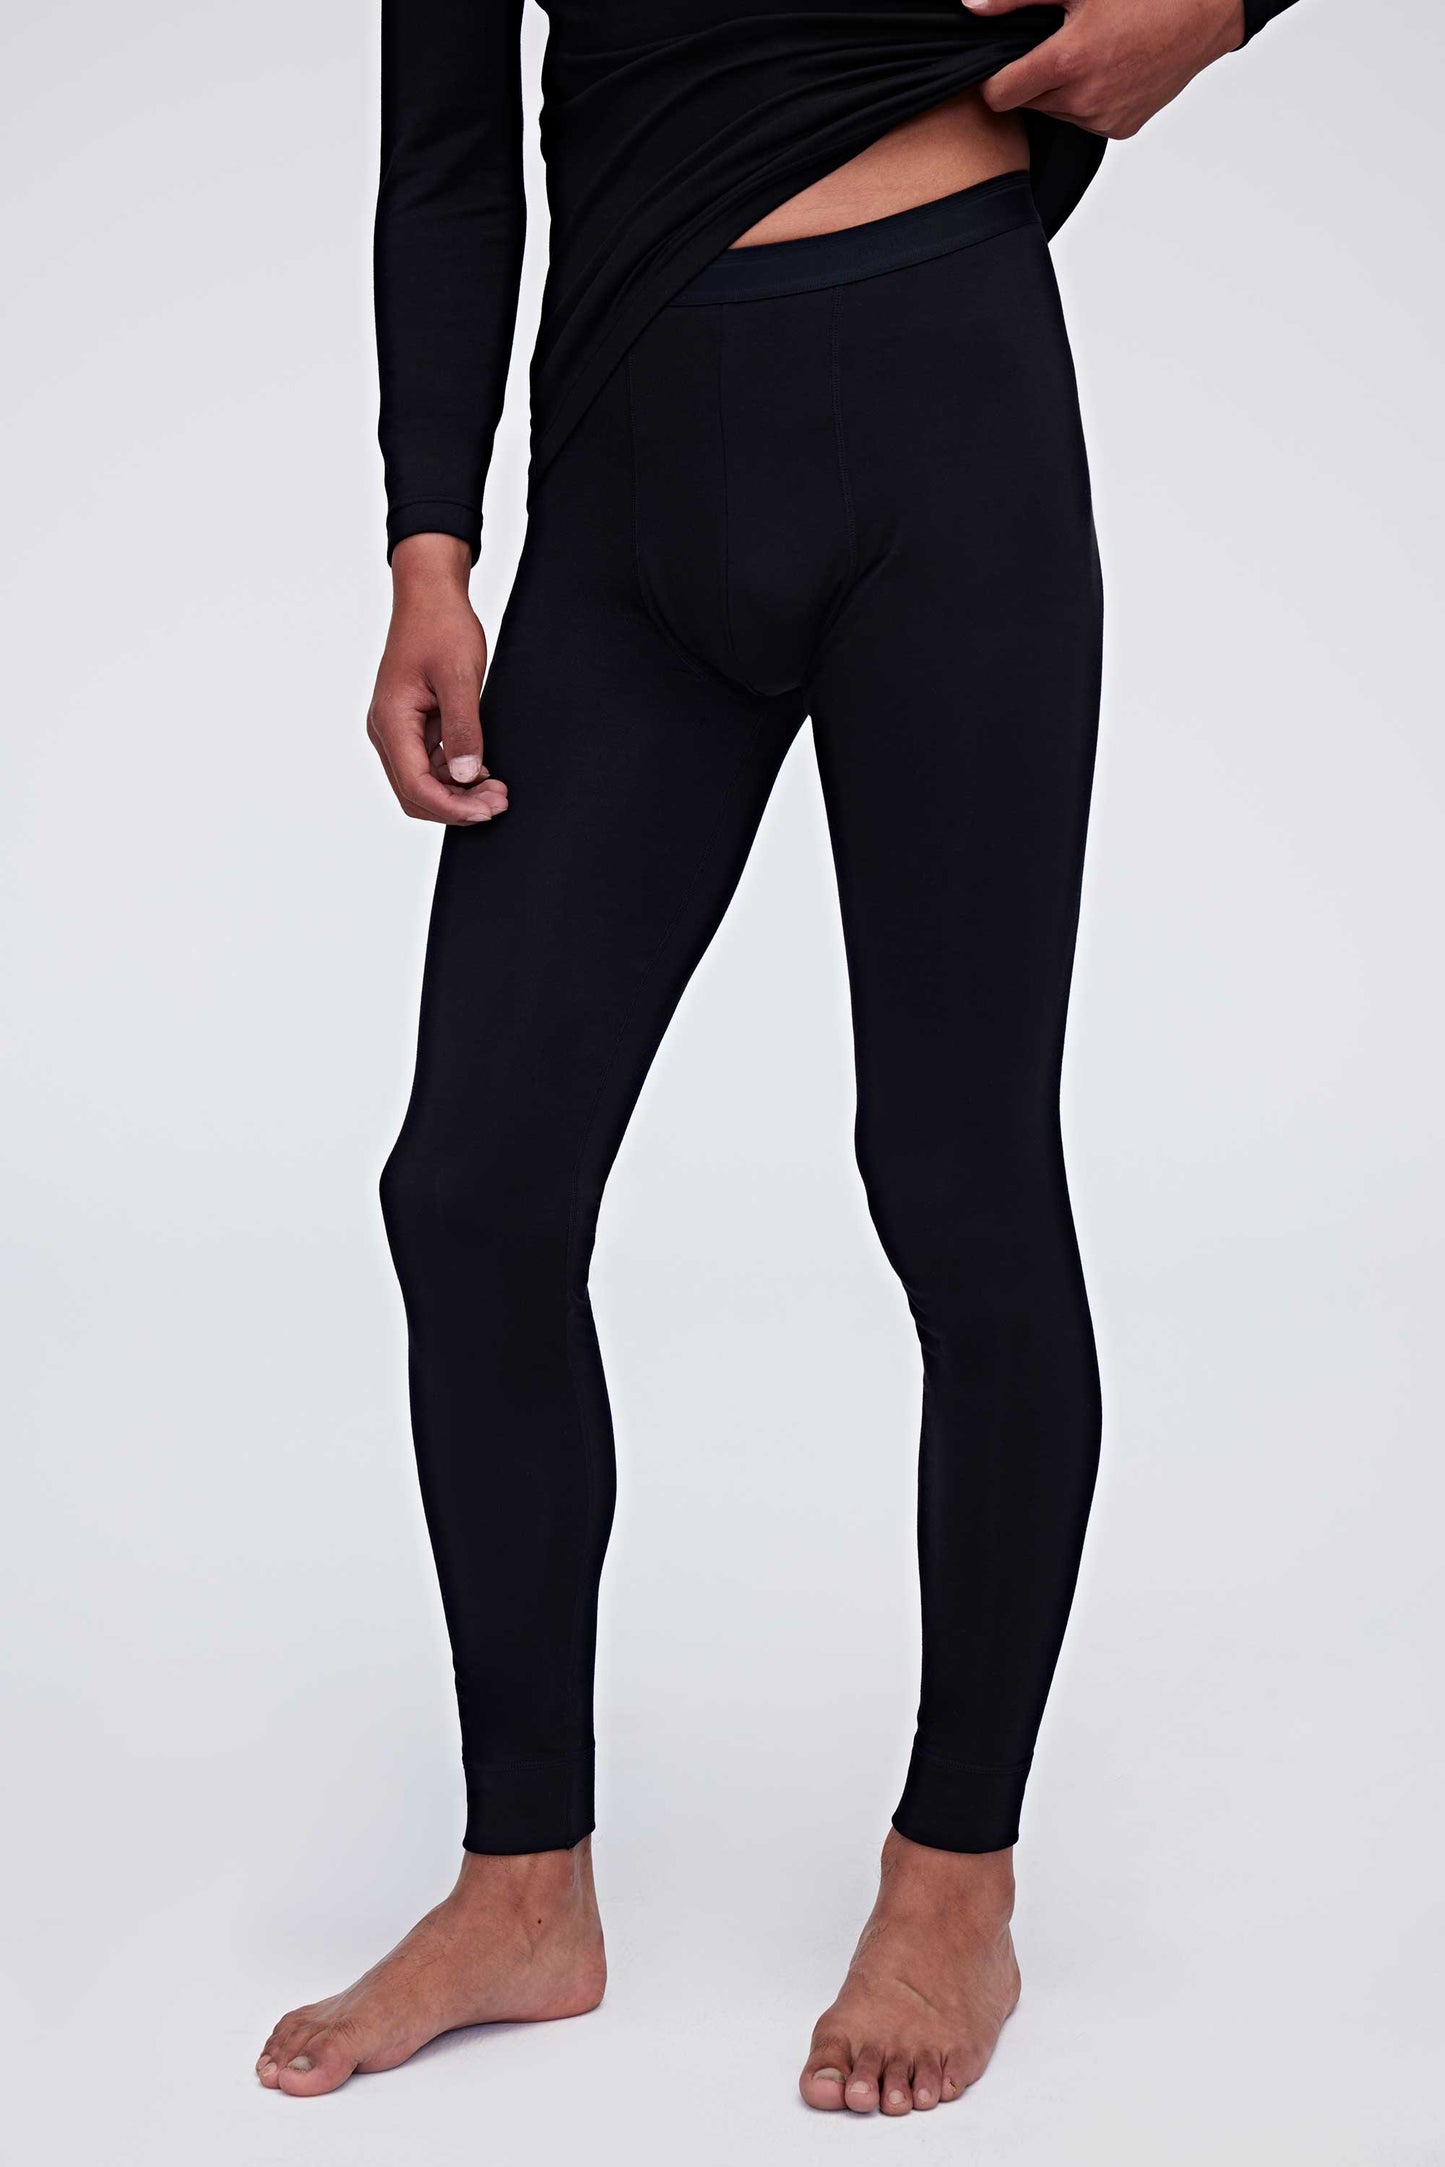 Front view of black thermal pants